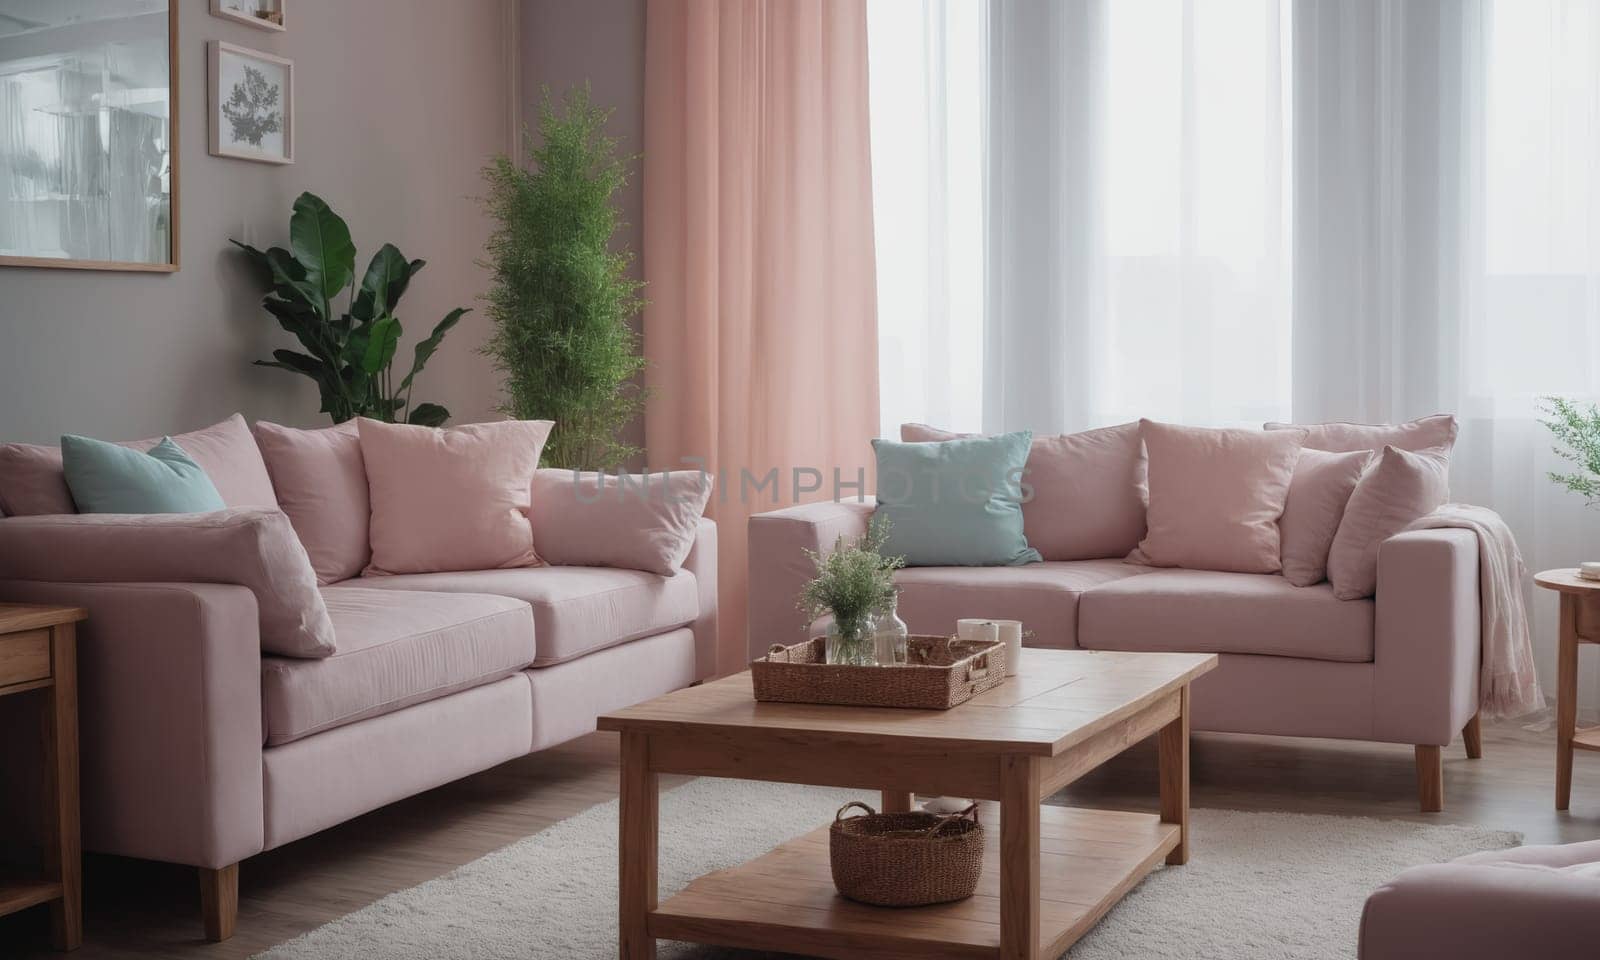 Interior of modern living room with pink sofa, coffee table and plants.